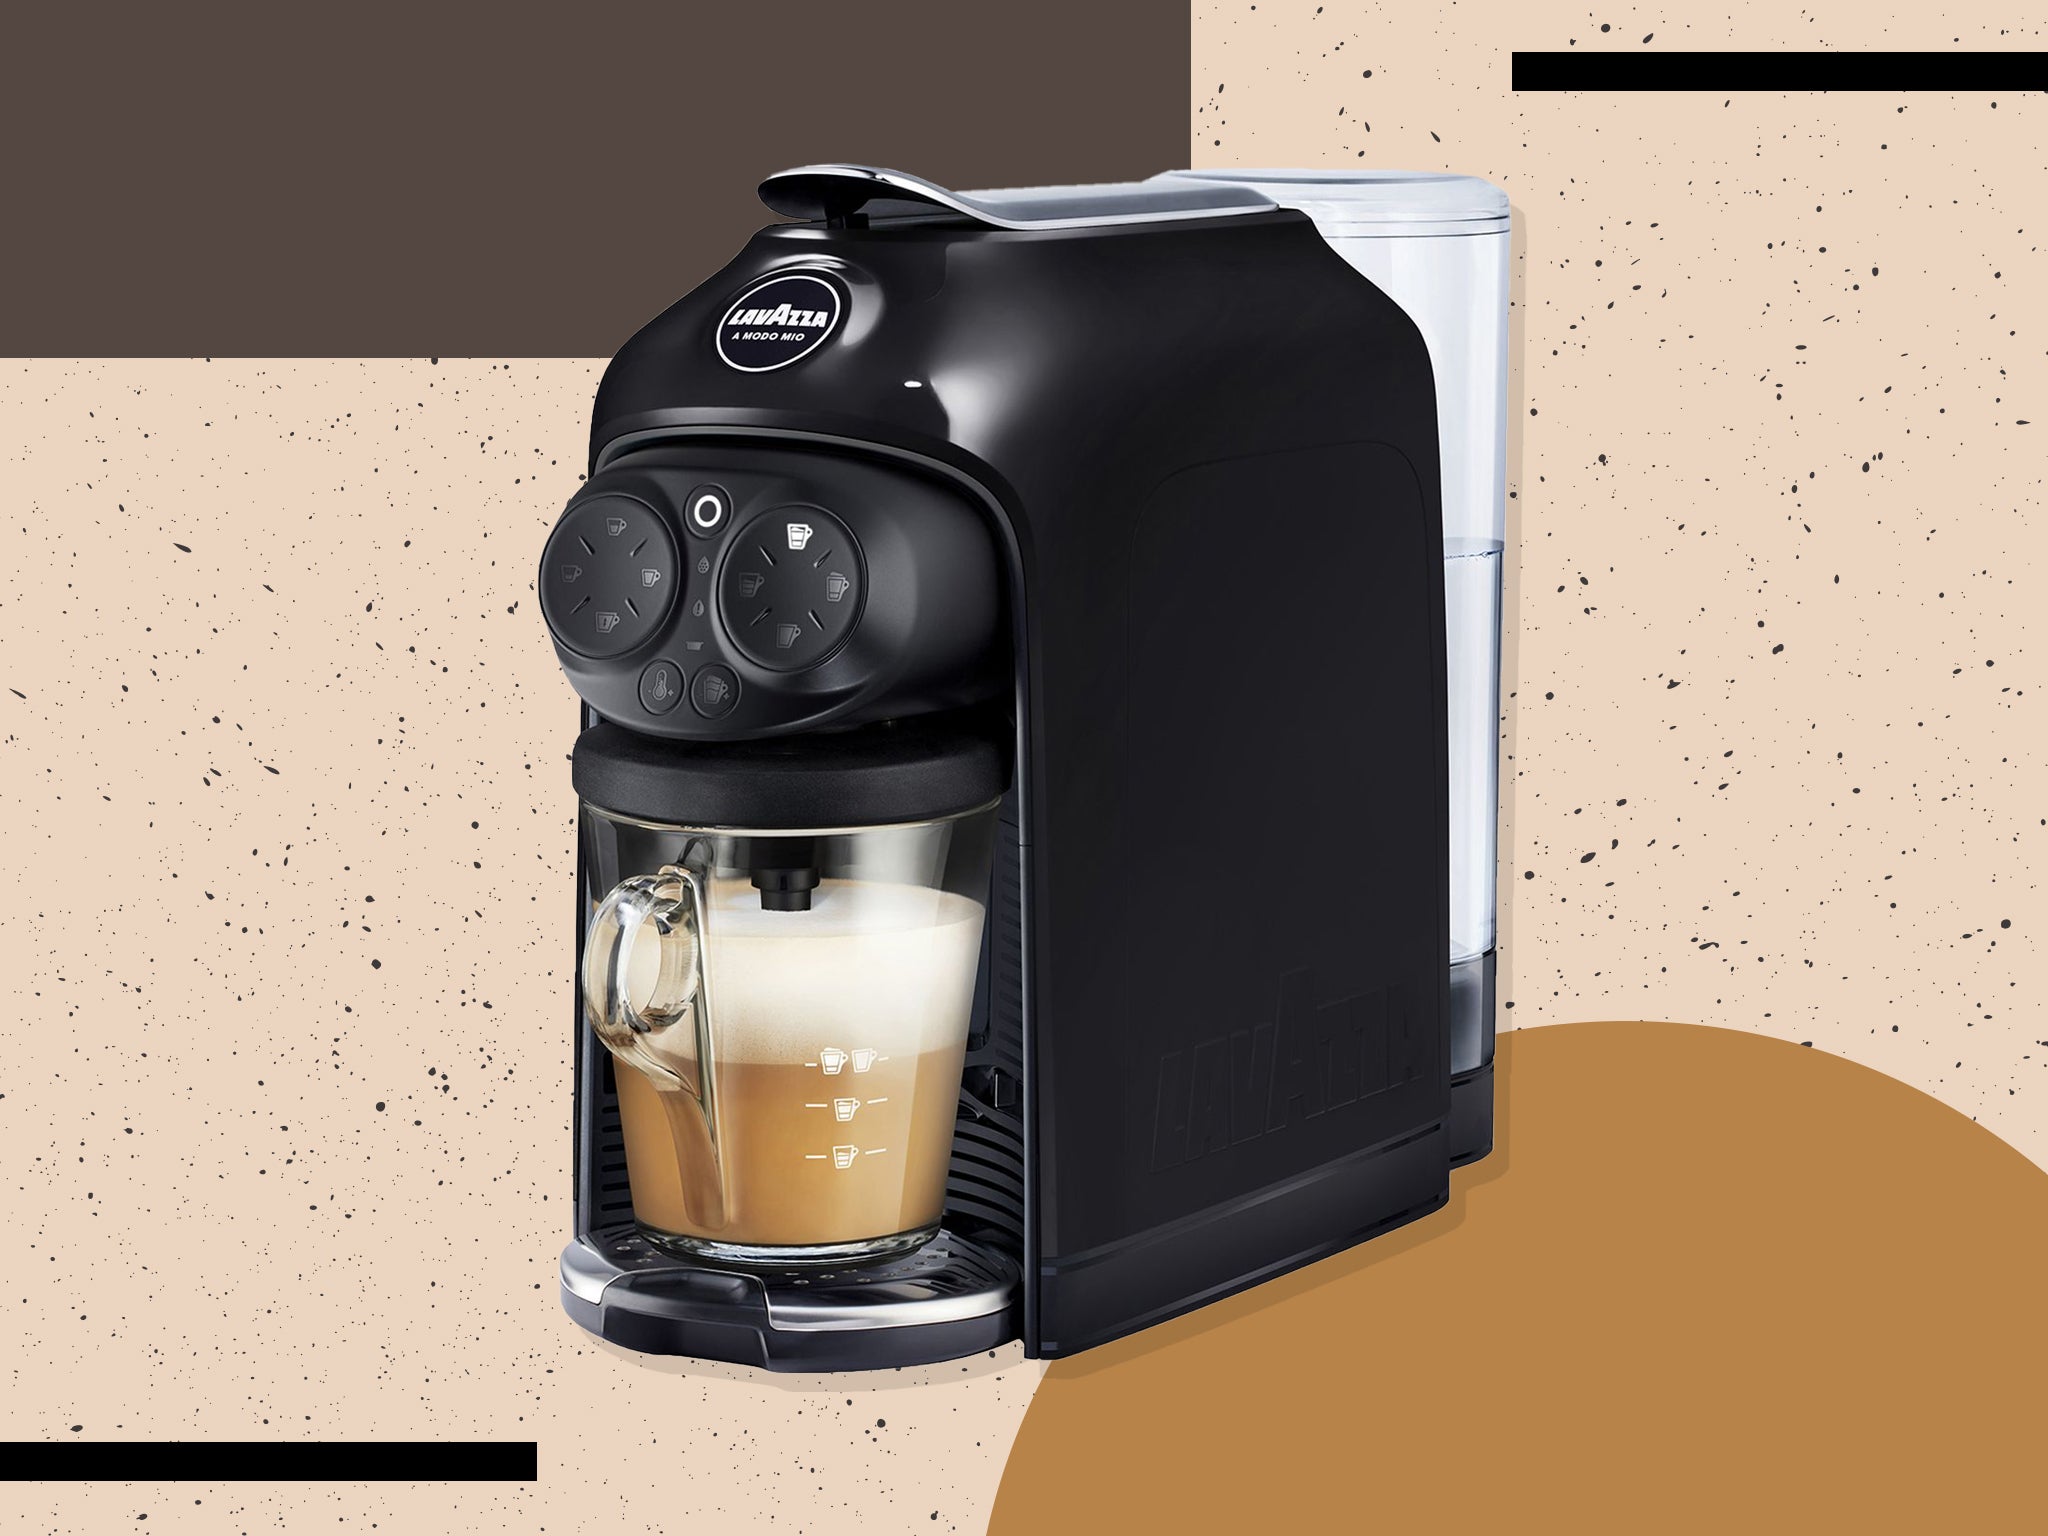 Lavazza deséa coffee machine review: We put the pod model to the test